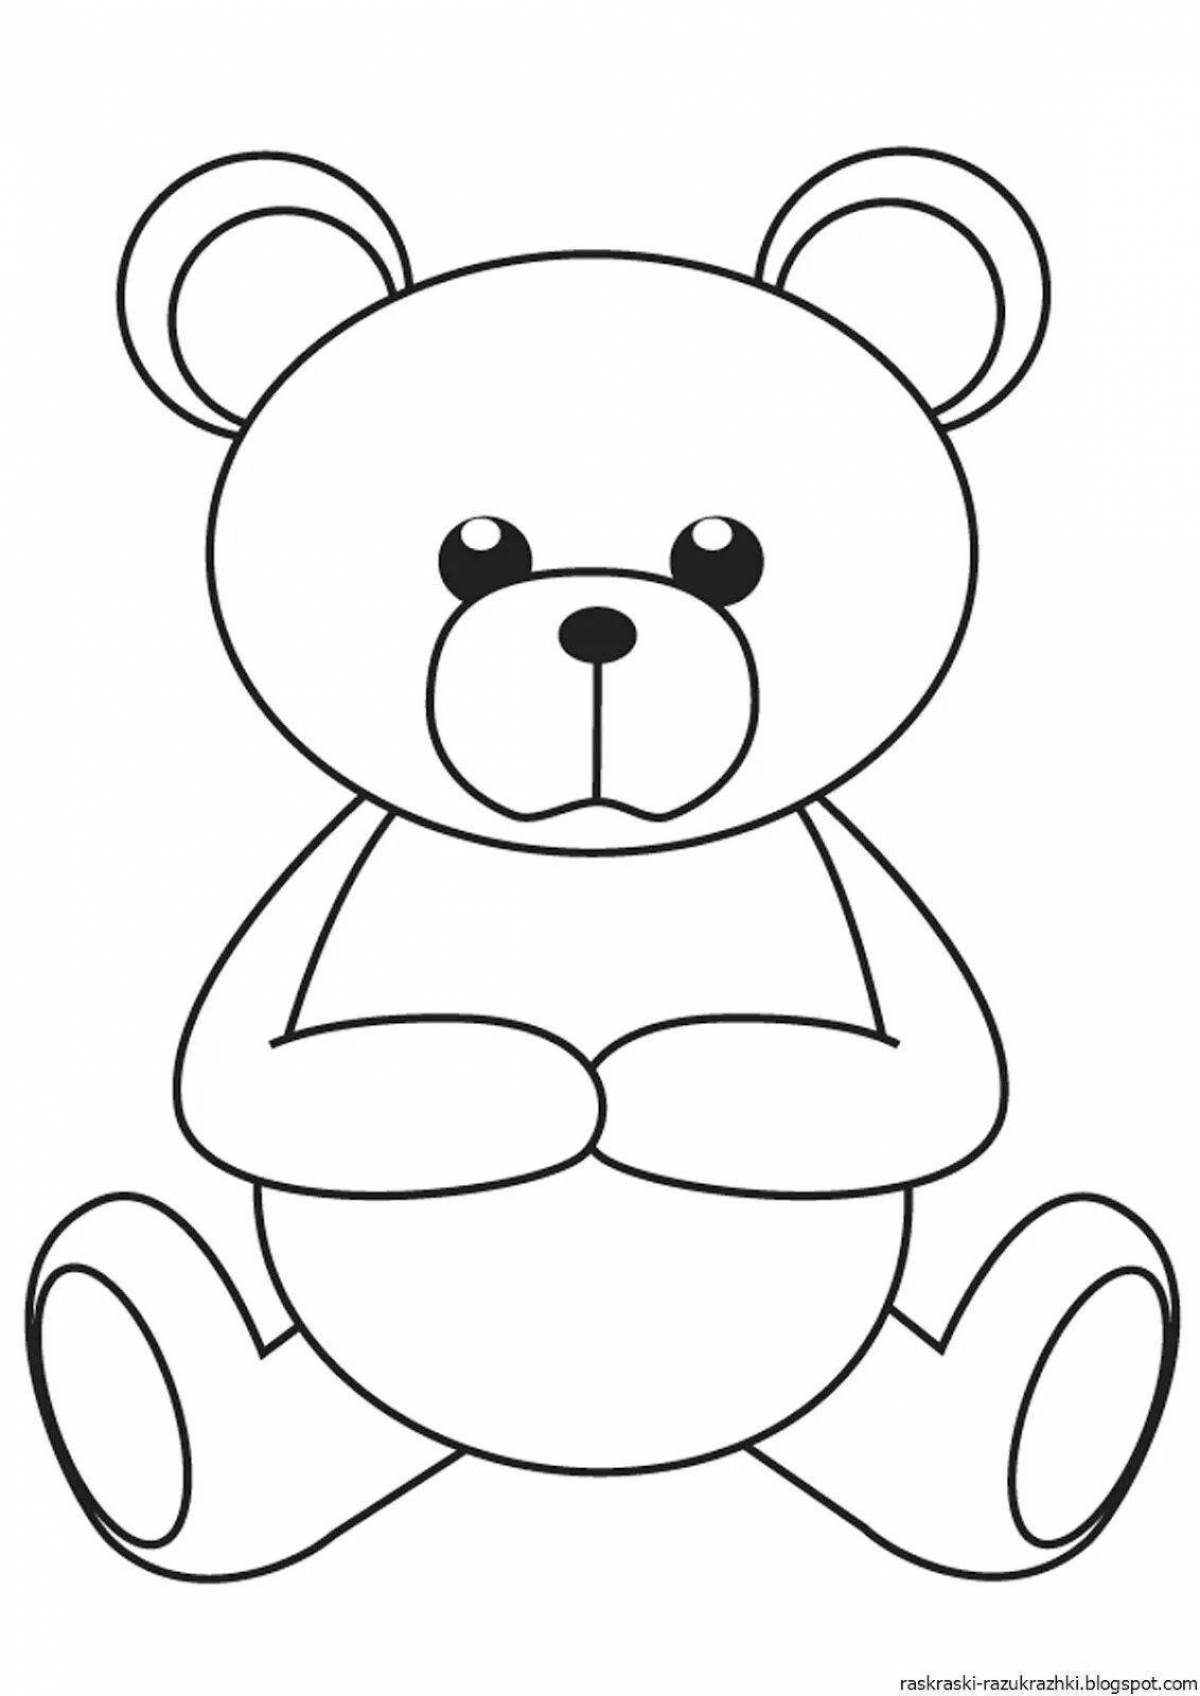 Fluffy bear coloring book for children 2-3 years old